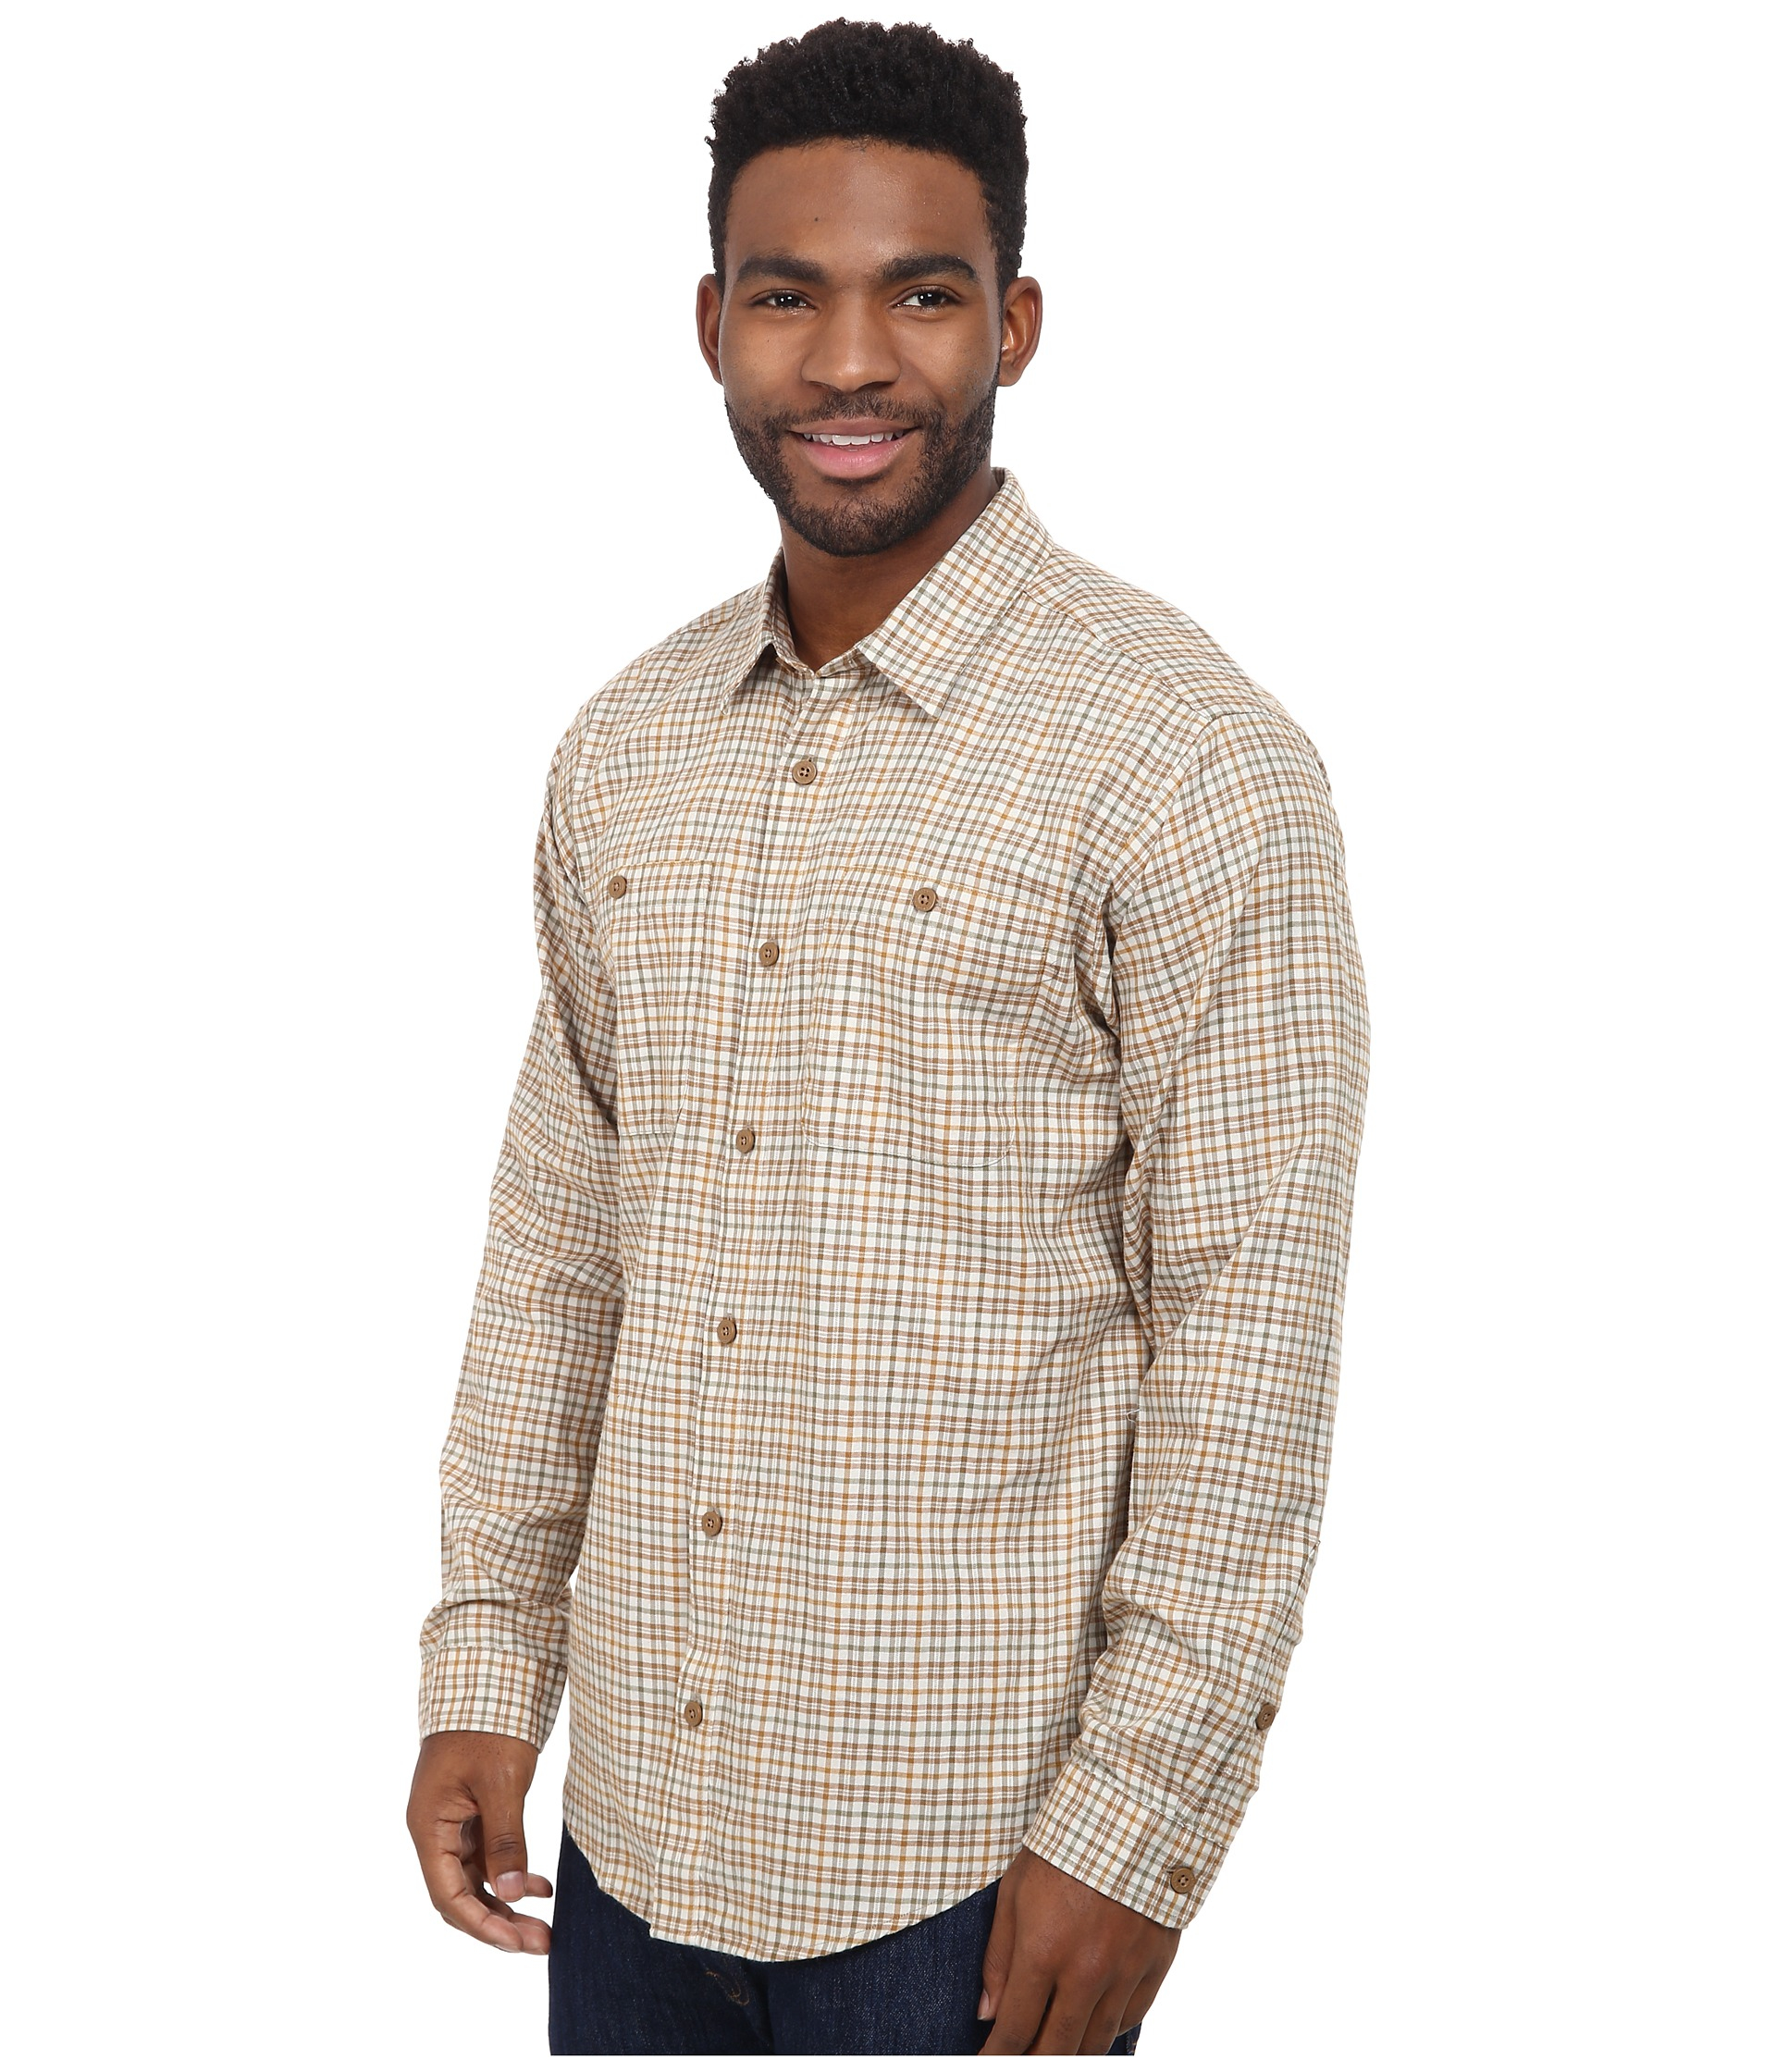 Patagonia L/s Pima Cotton Shirt in Natural for Men - Lyst